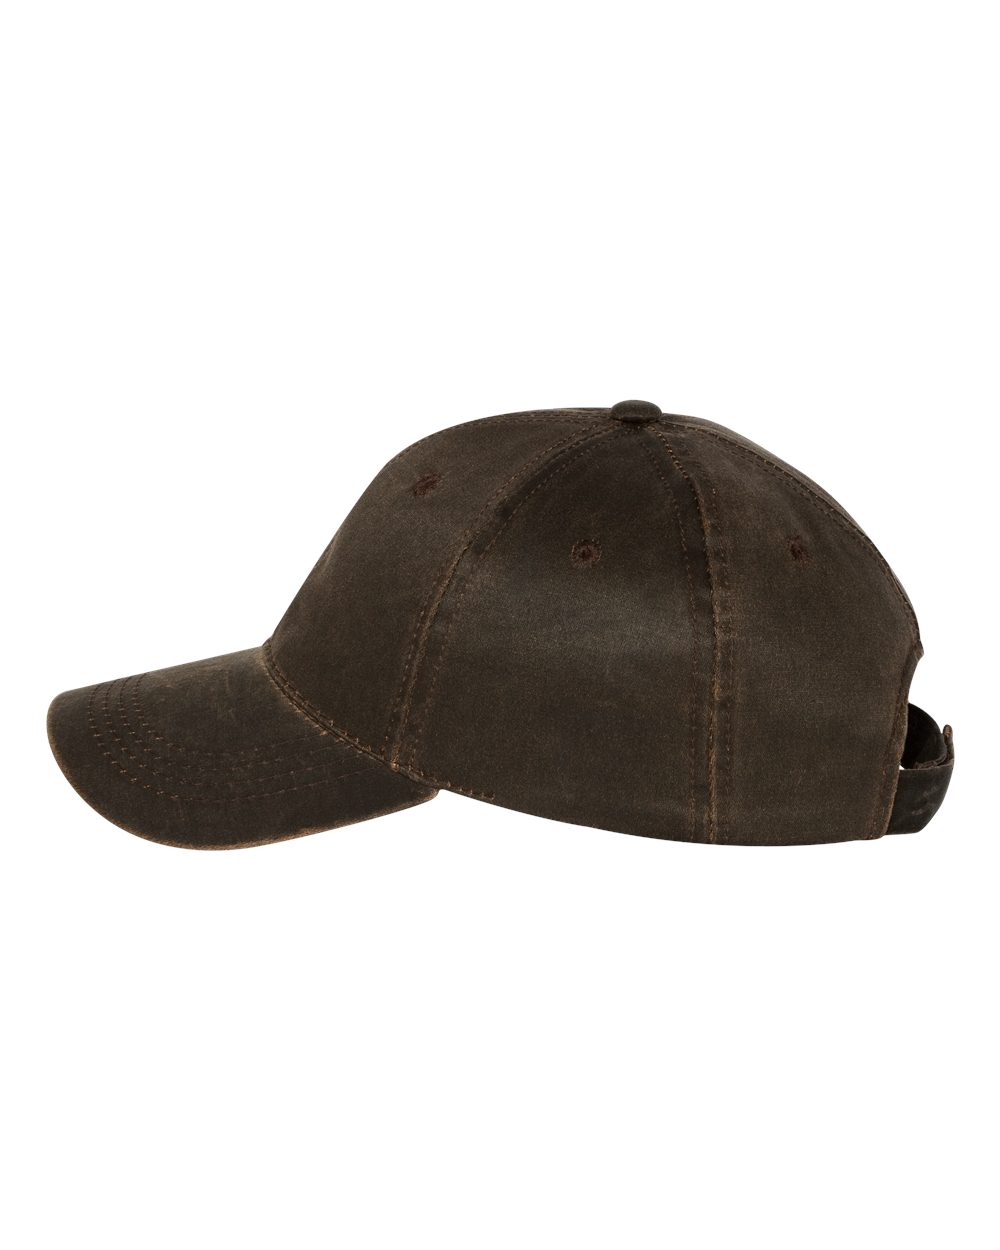 Outdoor Cap HPD605-Weathered Cotton Twill Cap